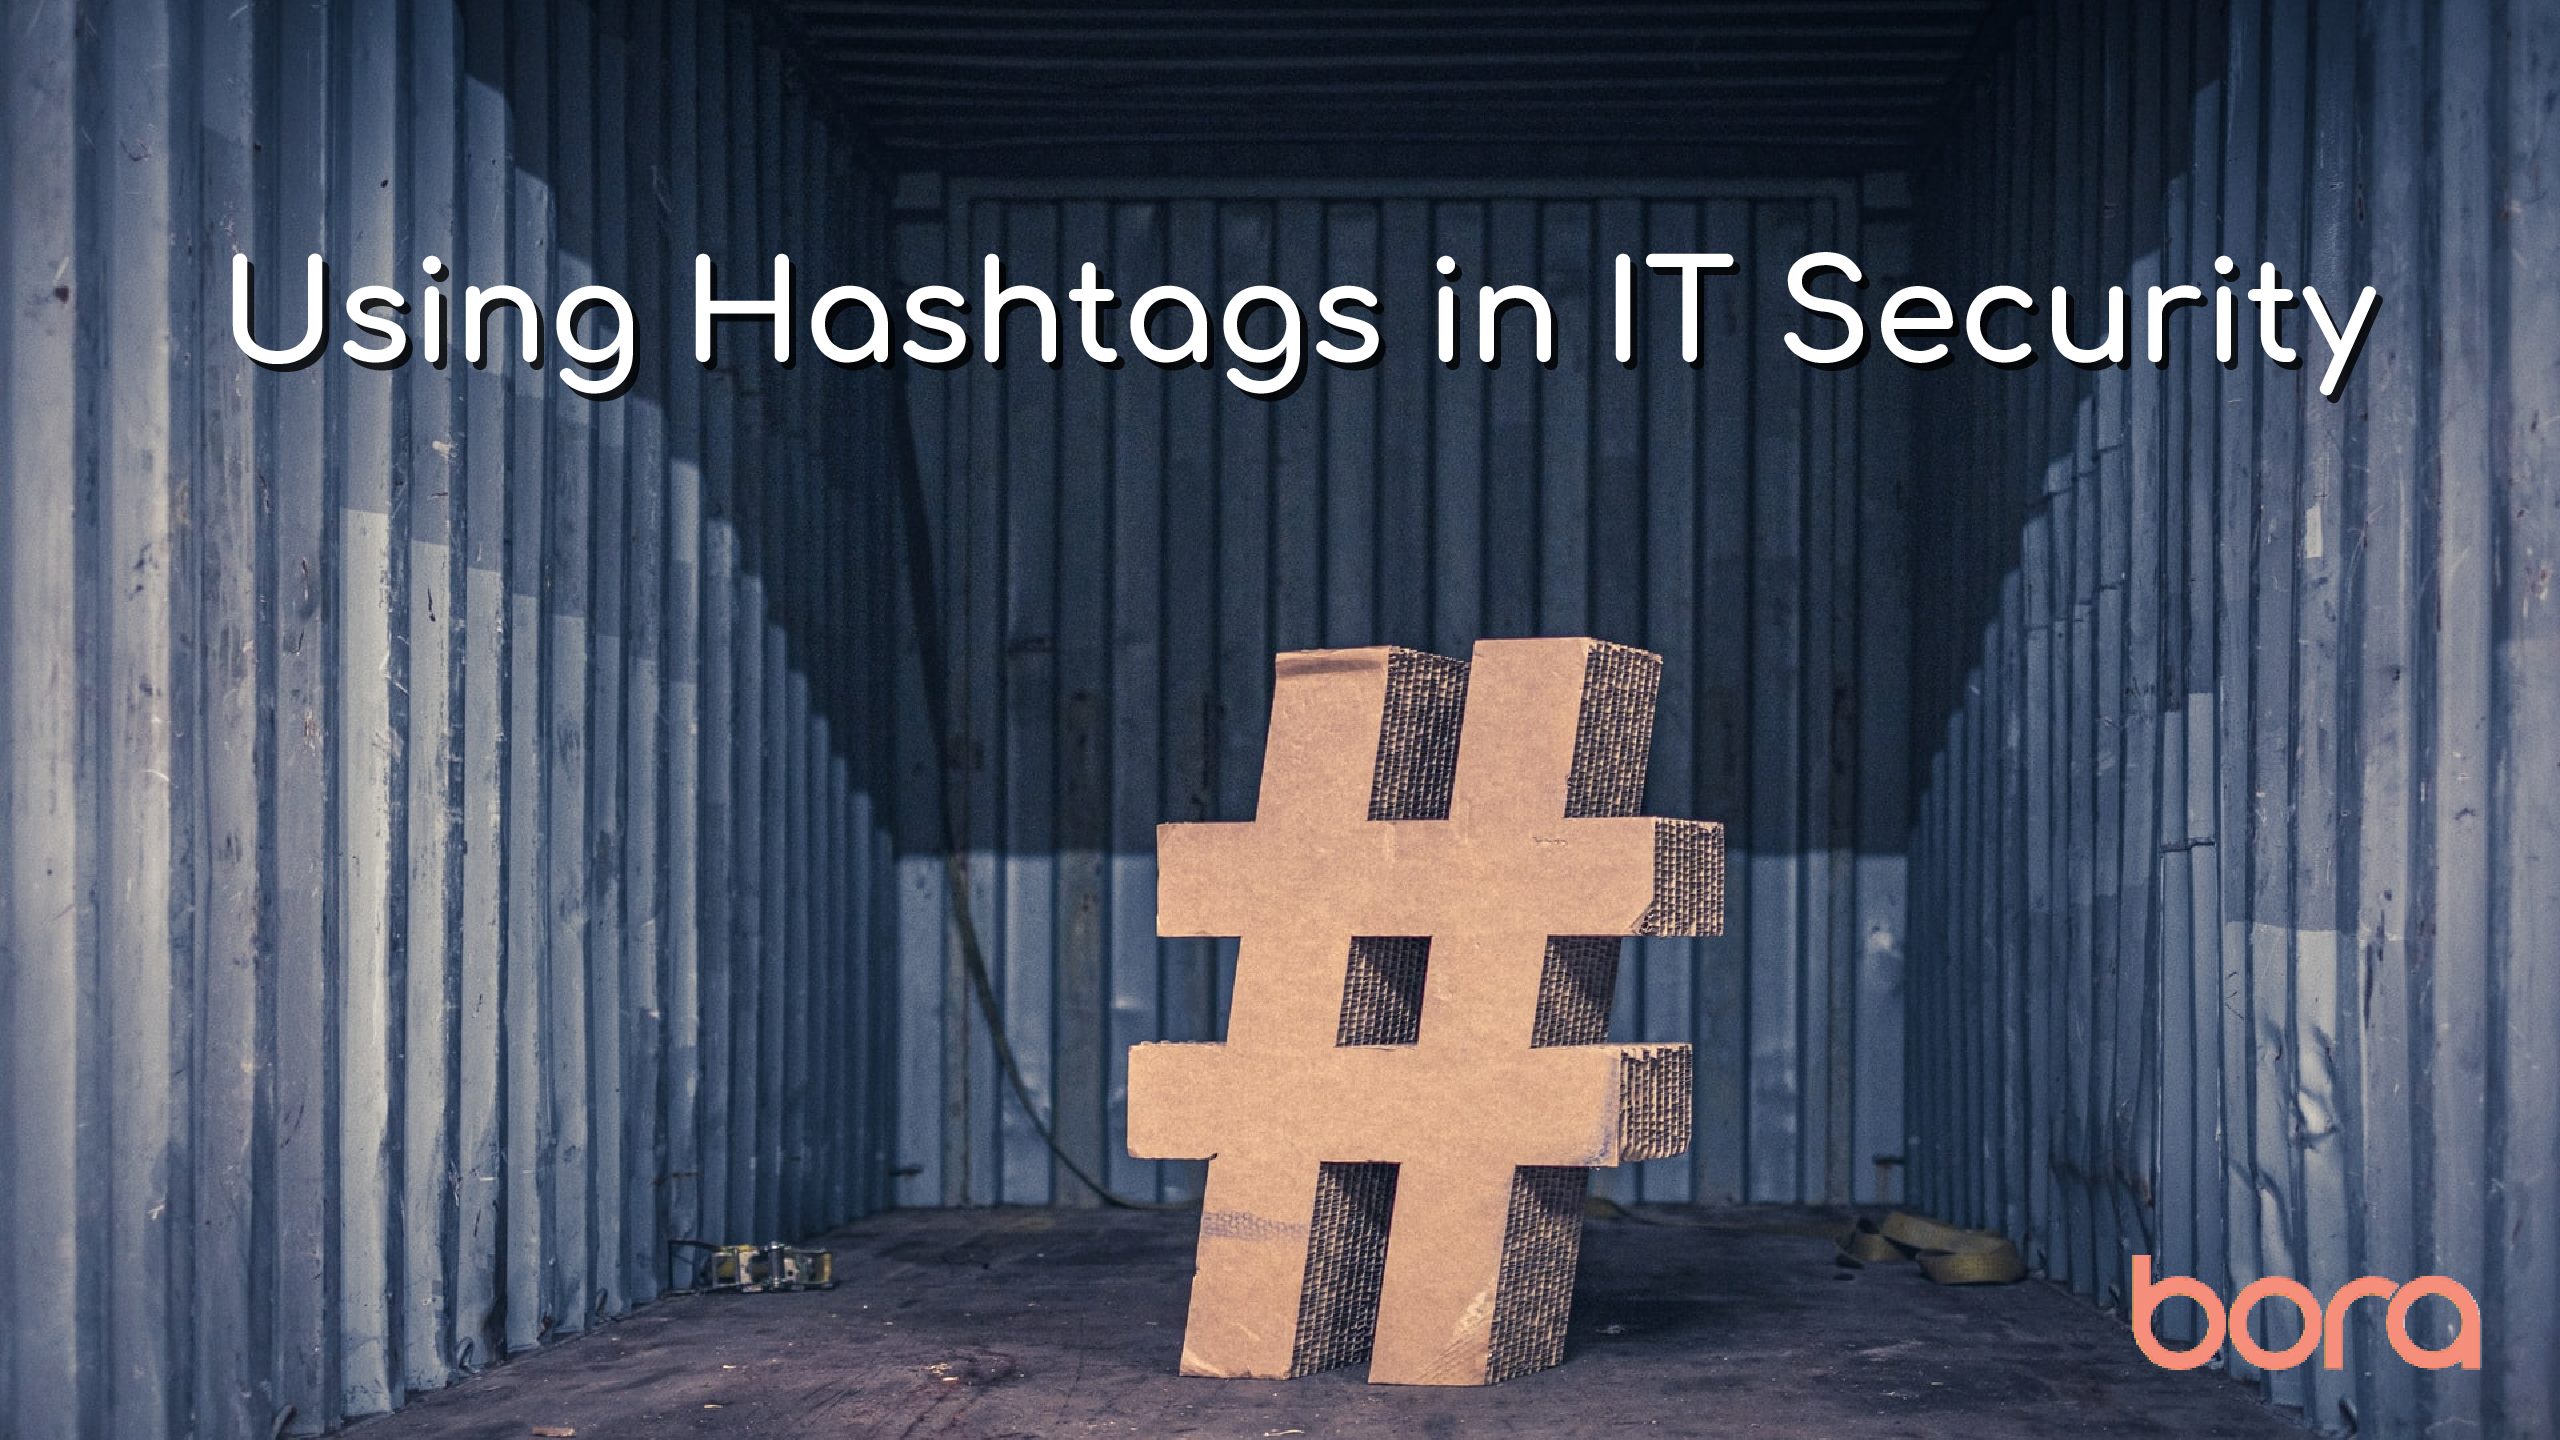 Using Hashtags in IT Security